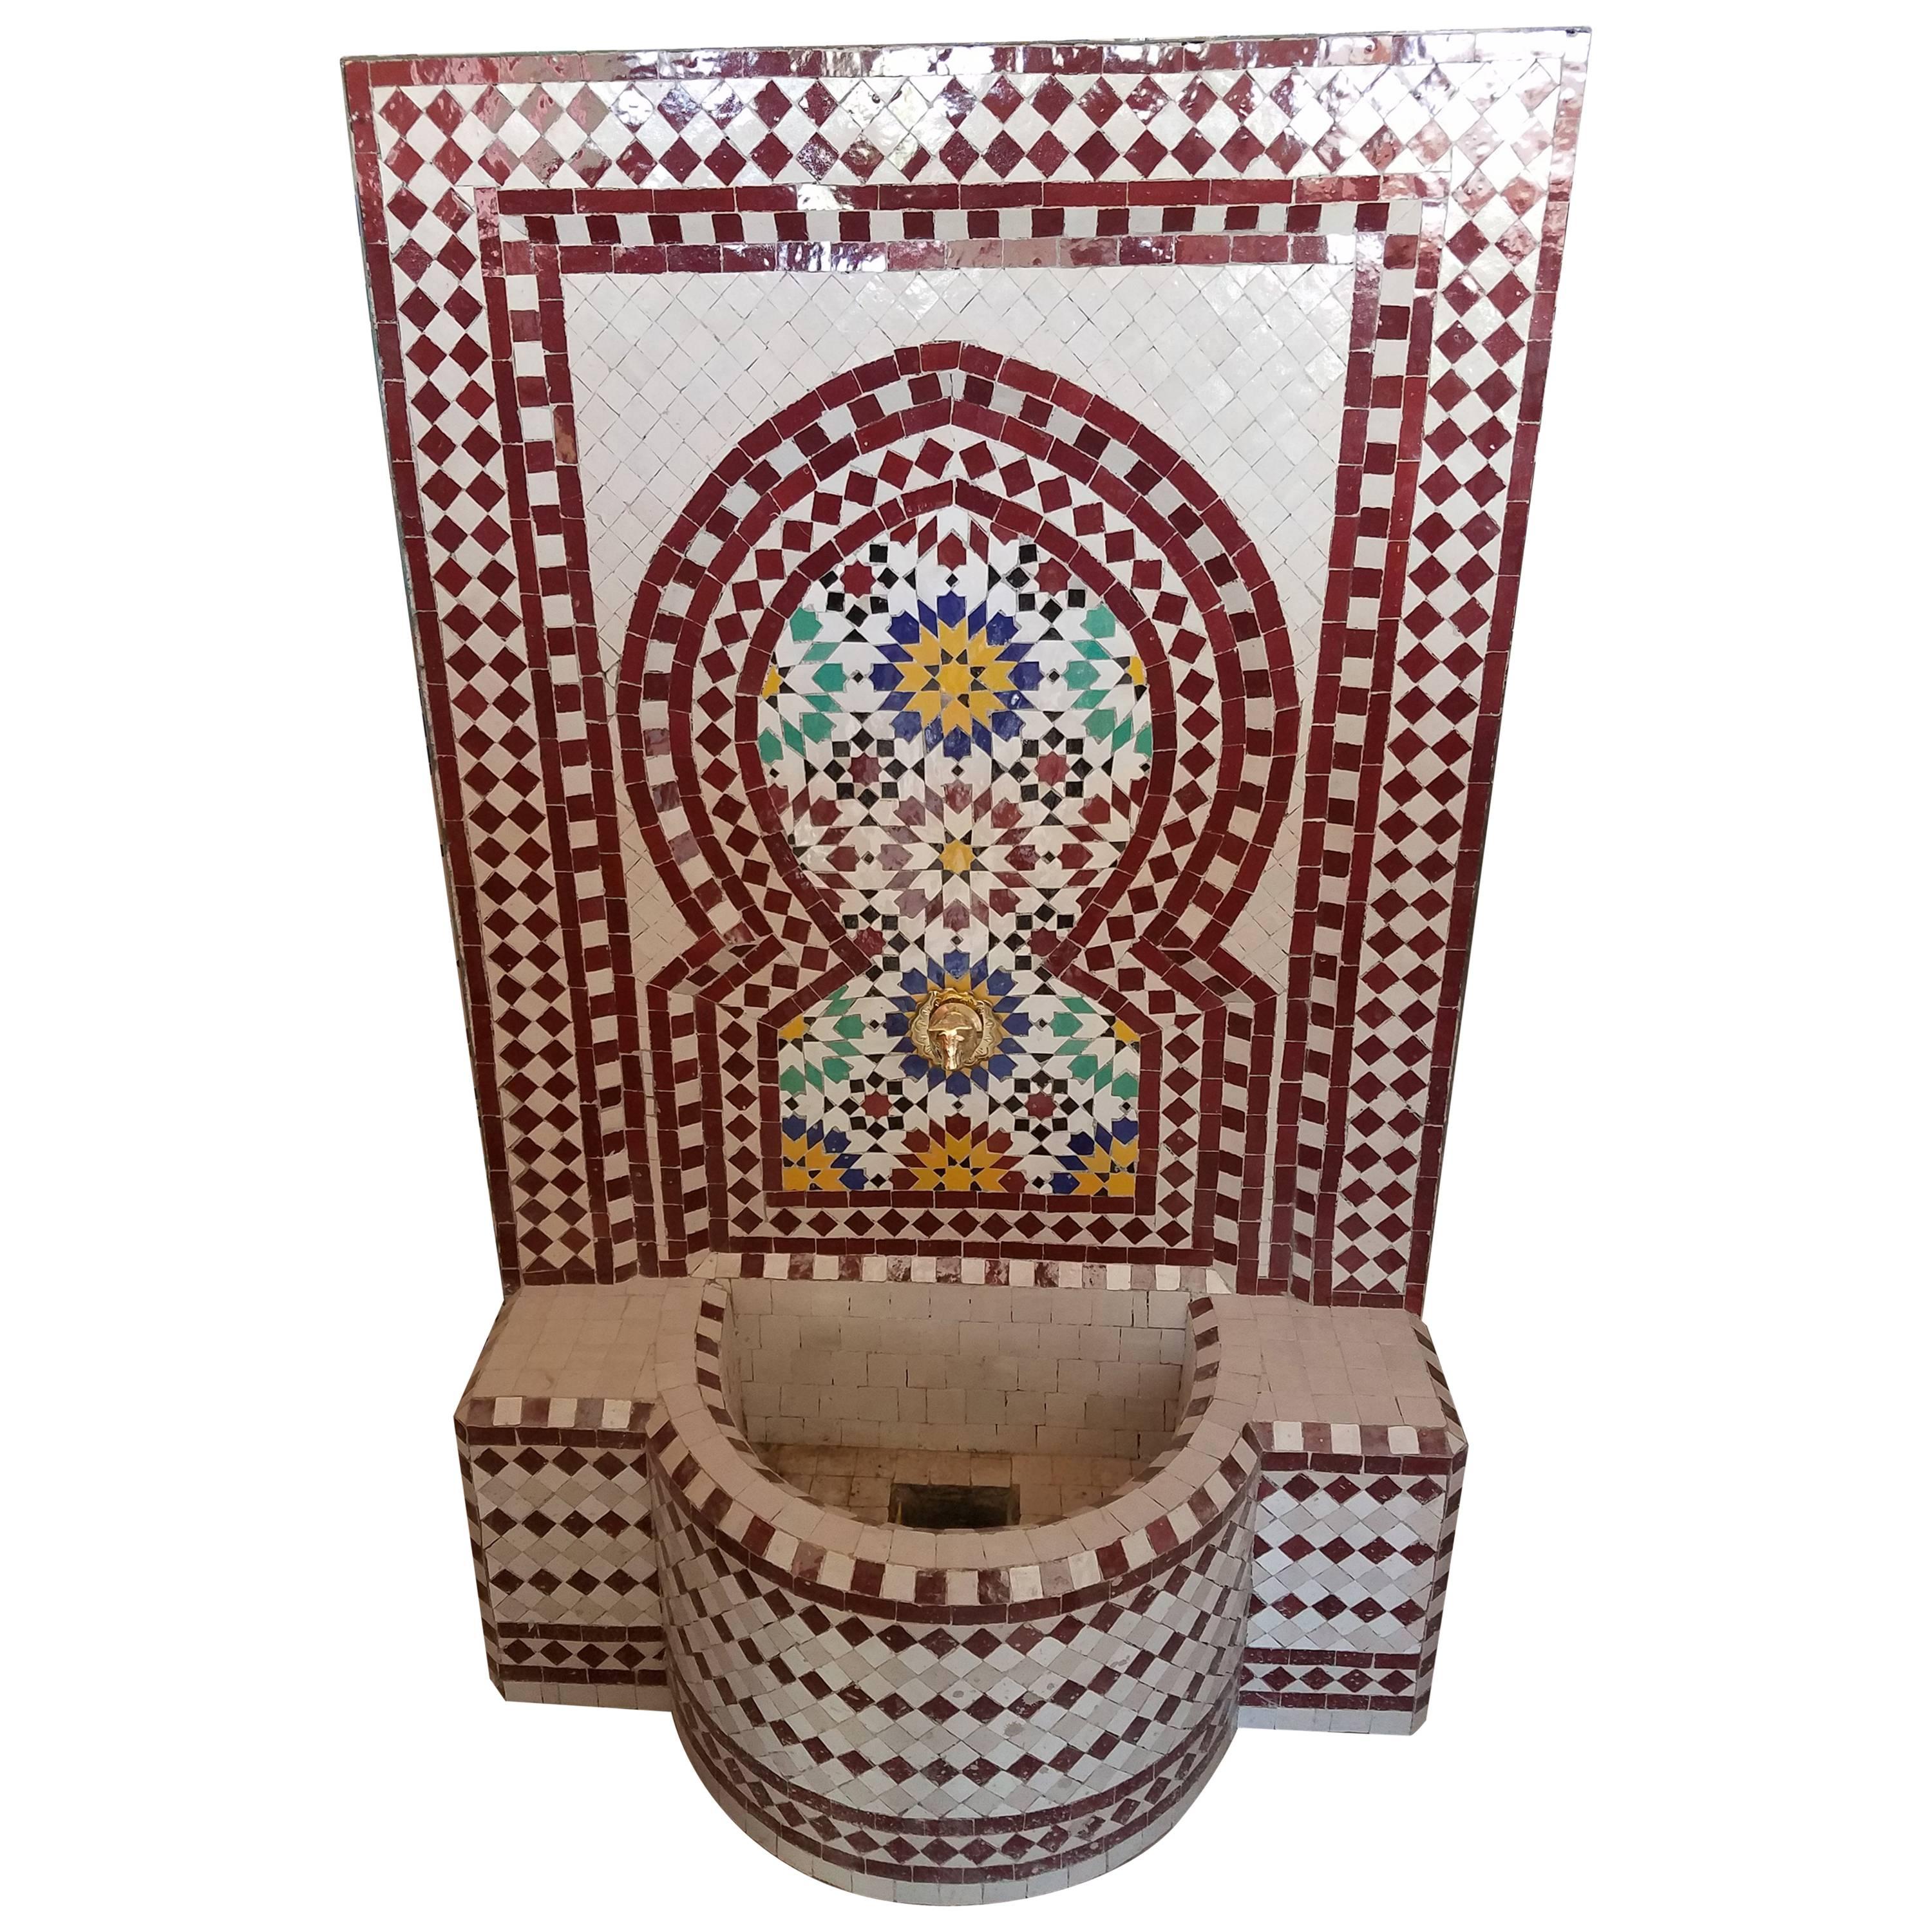 Brick Red/Multicolor Moroccan Mosaic Fountain, Garden or Indoors For Sale